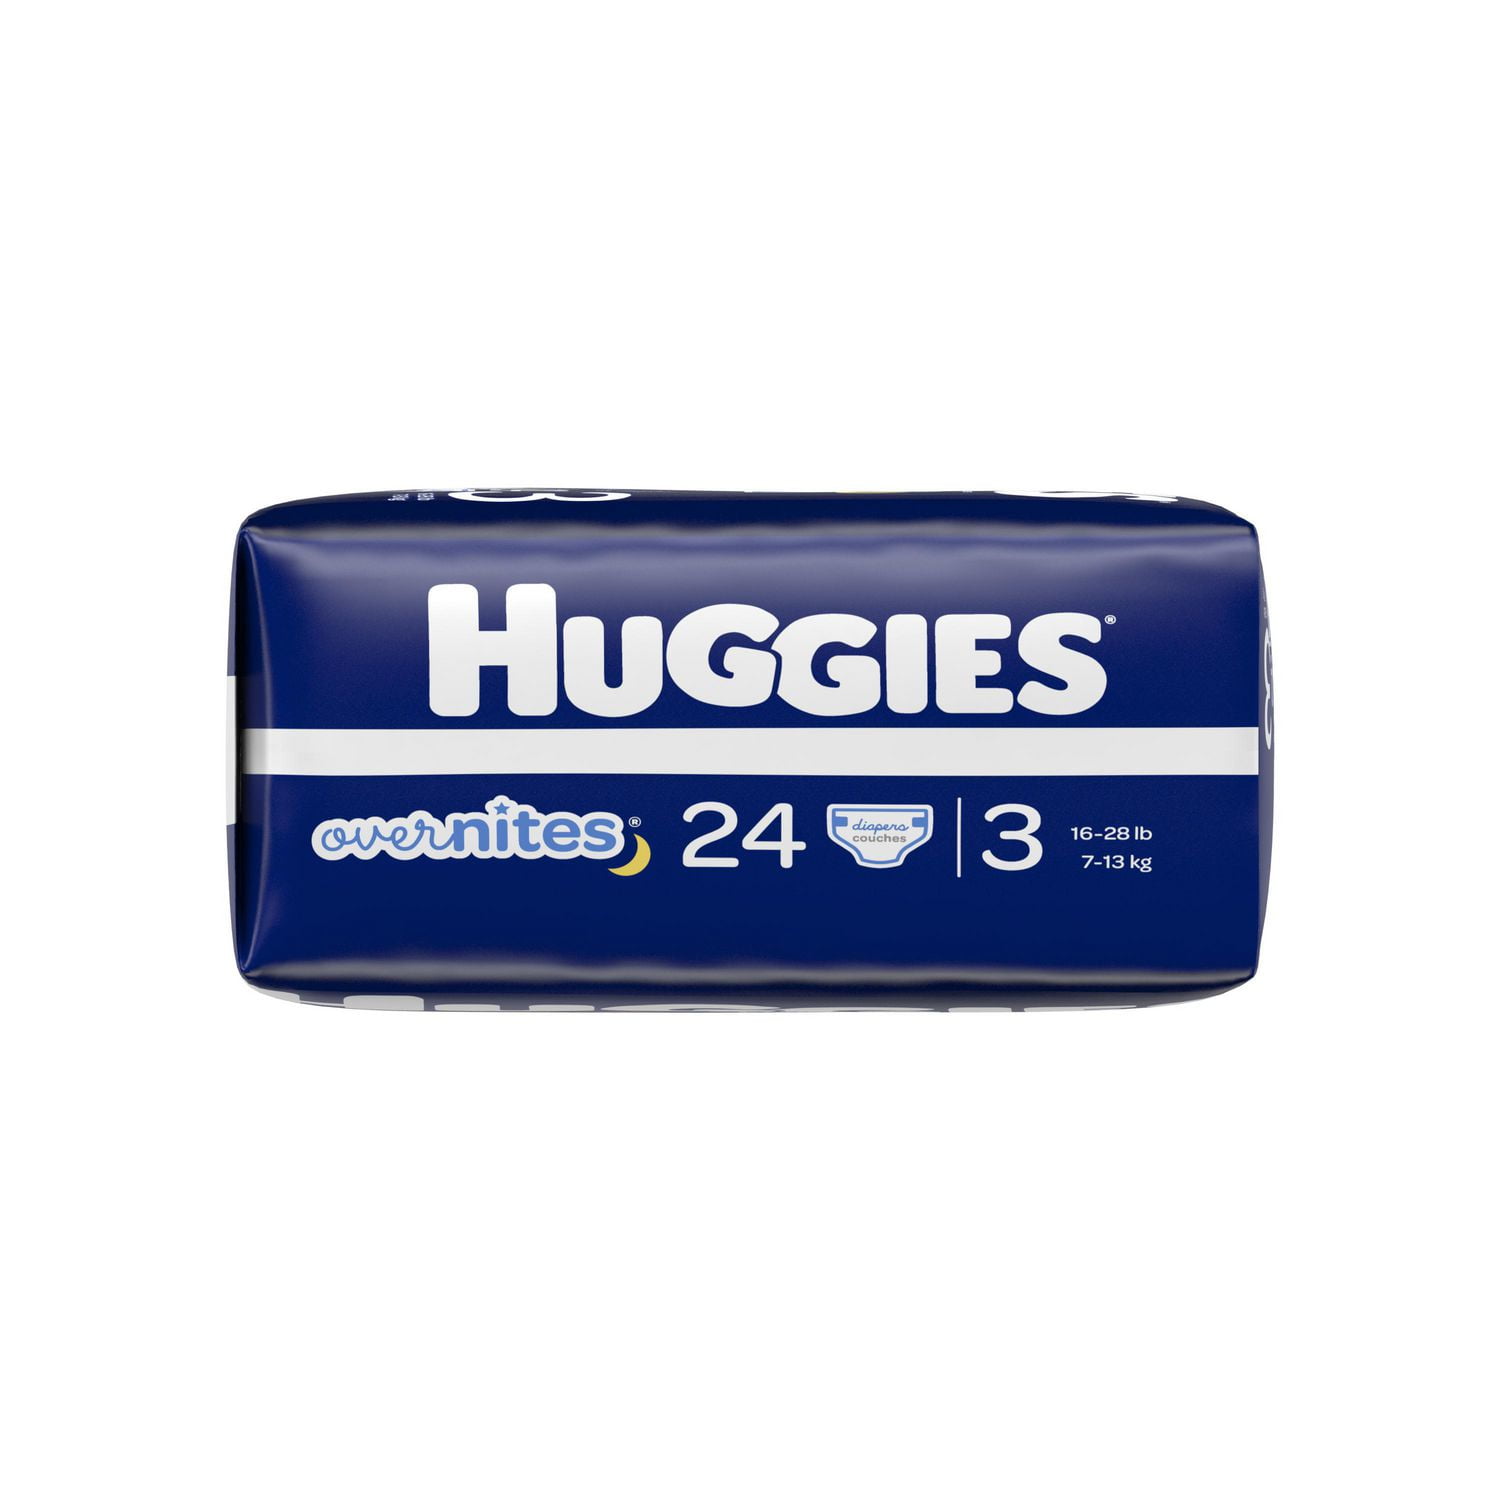 Huggies Overnites Nighttime Diapers, Size 3, 80 Ct